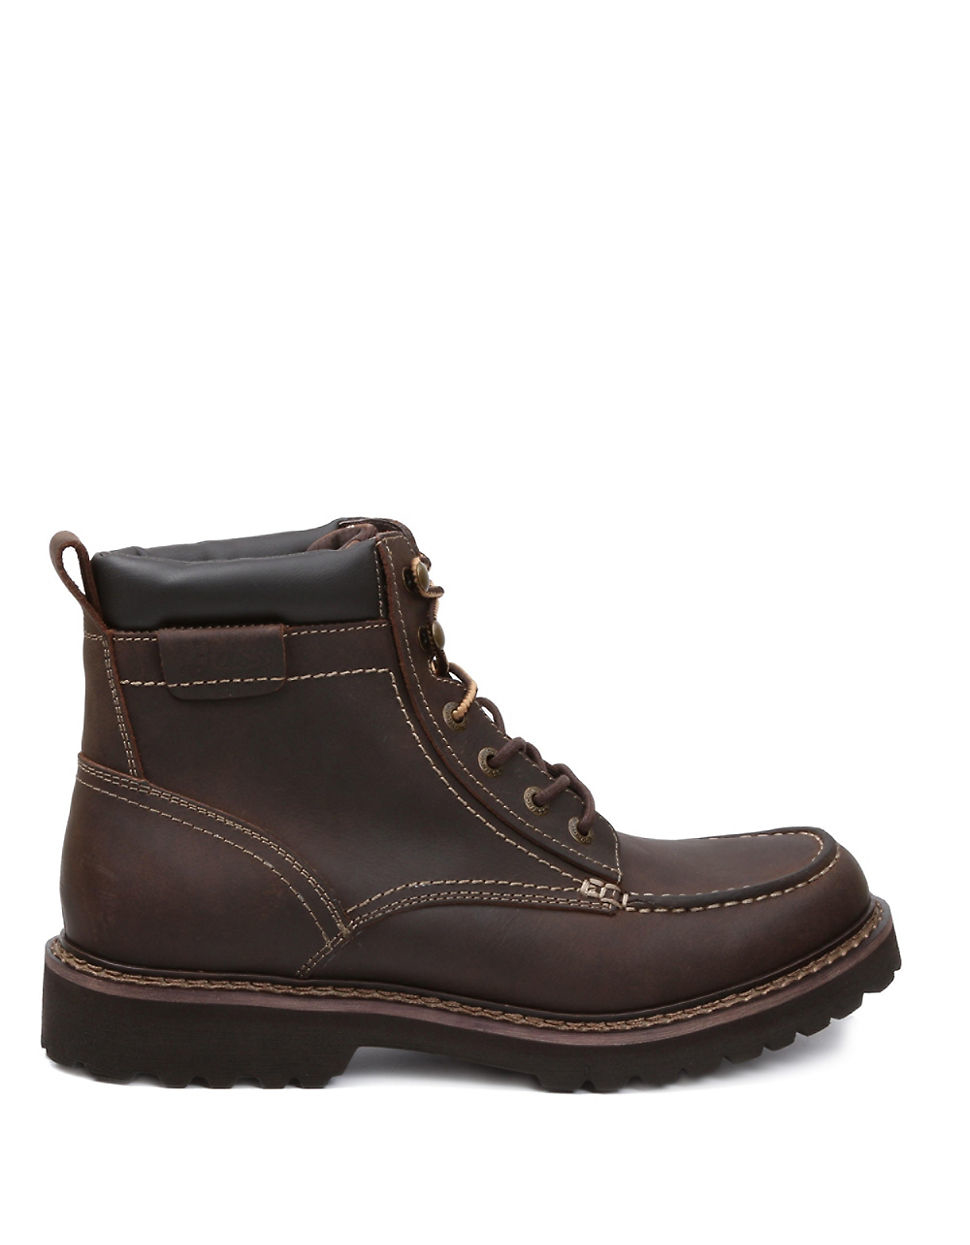 Lyst - G.H. Bass & Co. Errol Leather Boots in Brown for Men